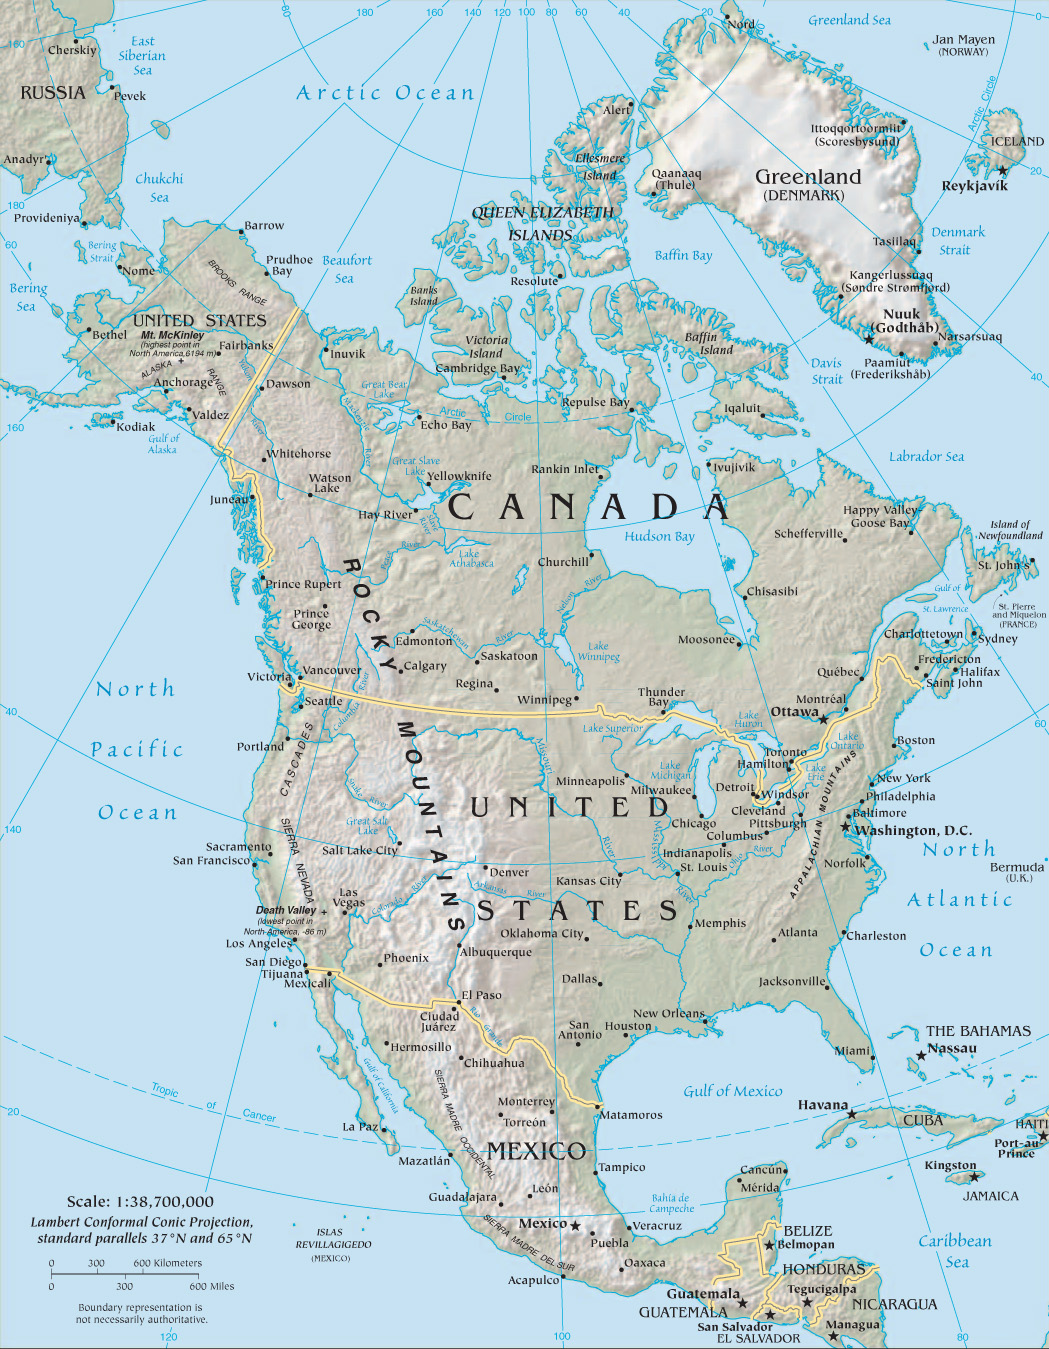 North America: Reference map, 2007